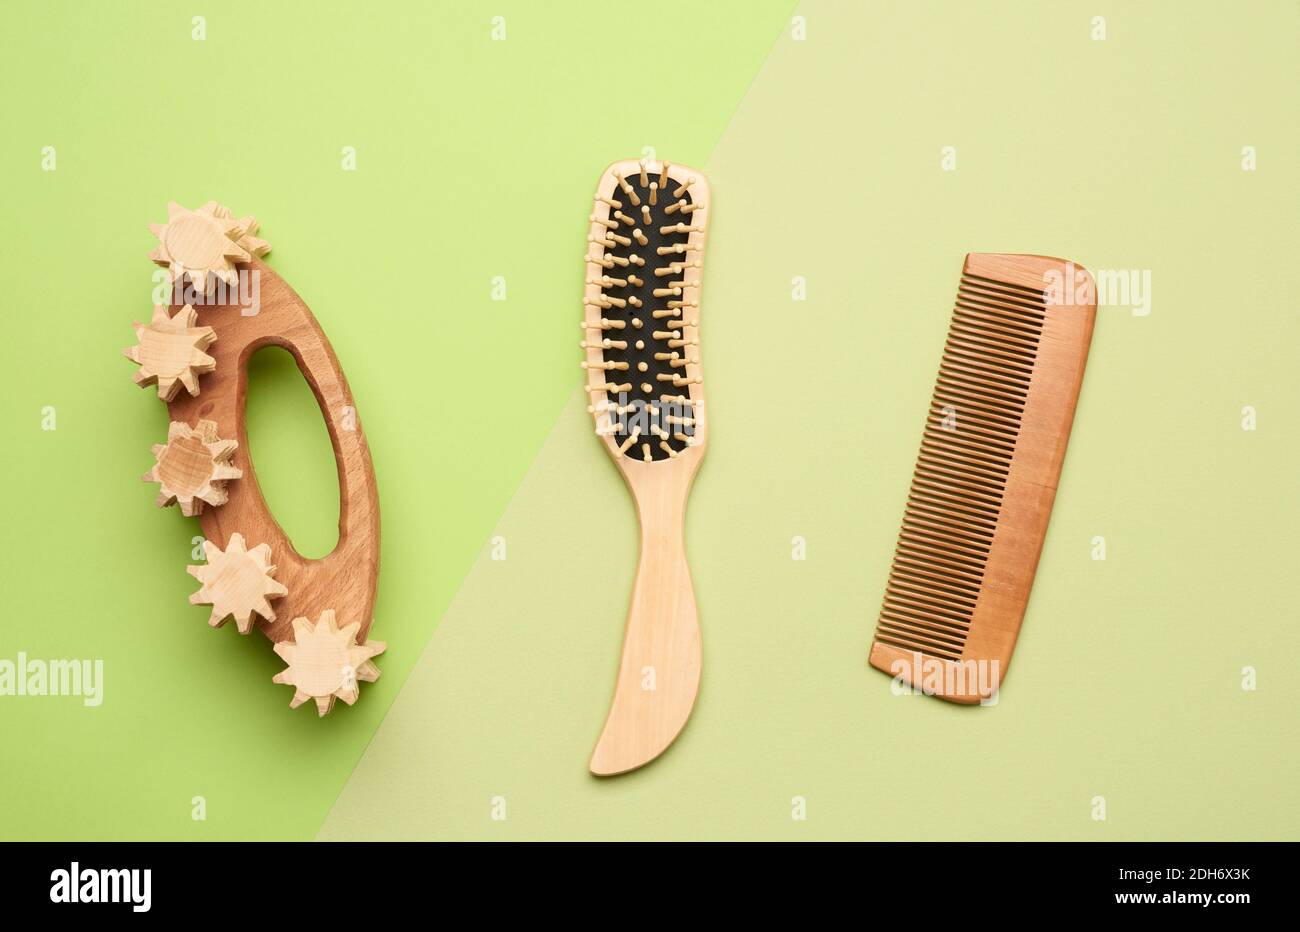 Various household items from recyclable  materials on a green background Stock Photo